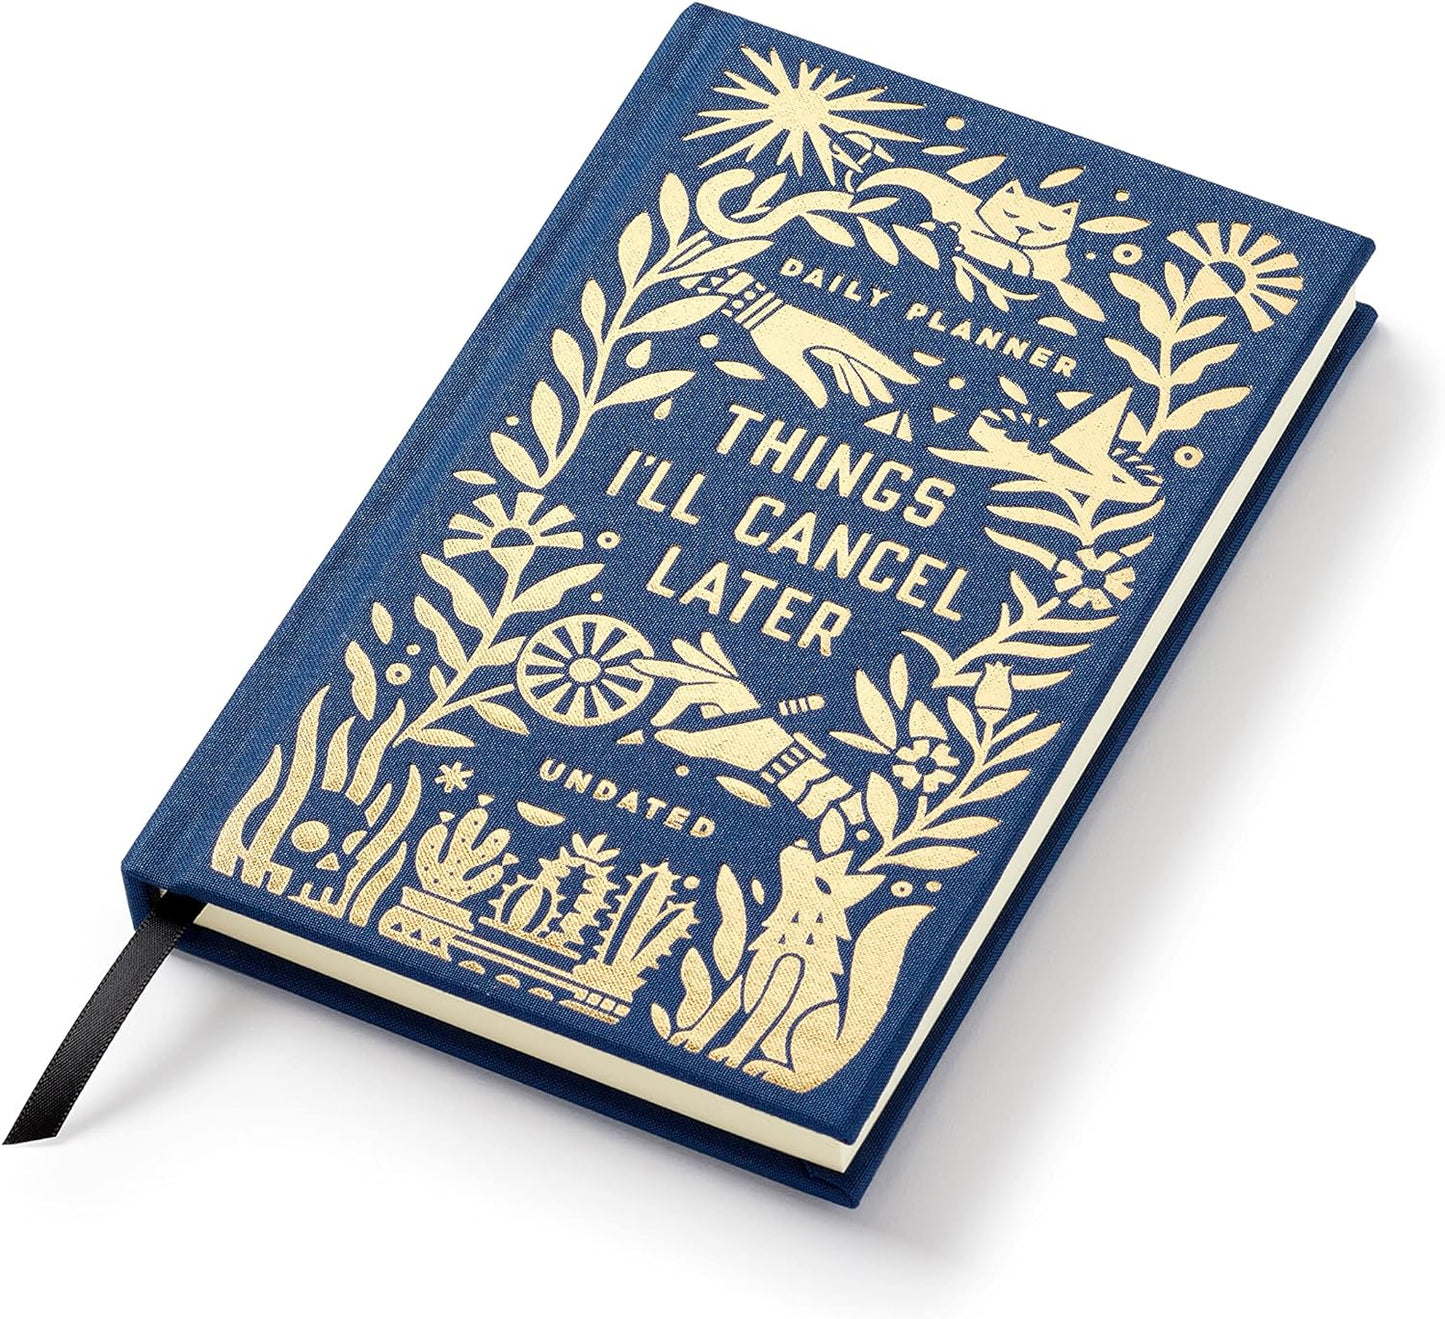 Things I'll Cancel Later – Undated Mini Planner